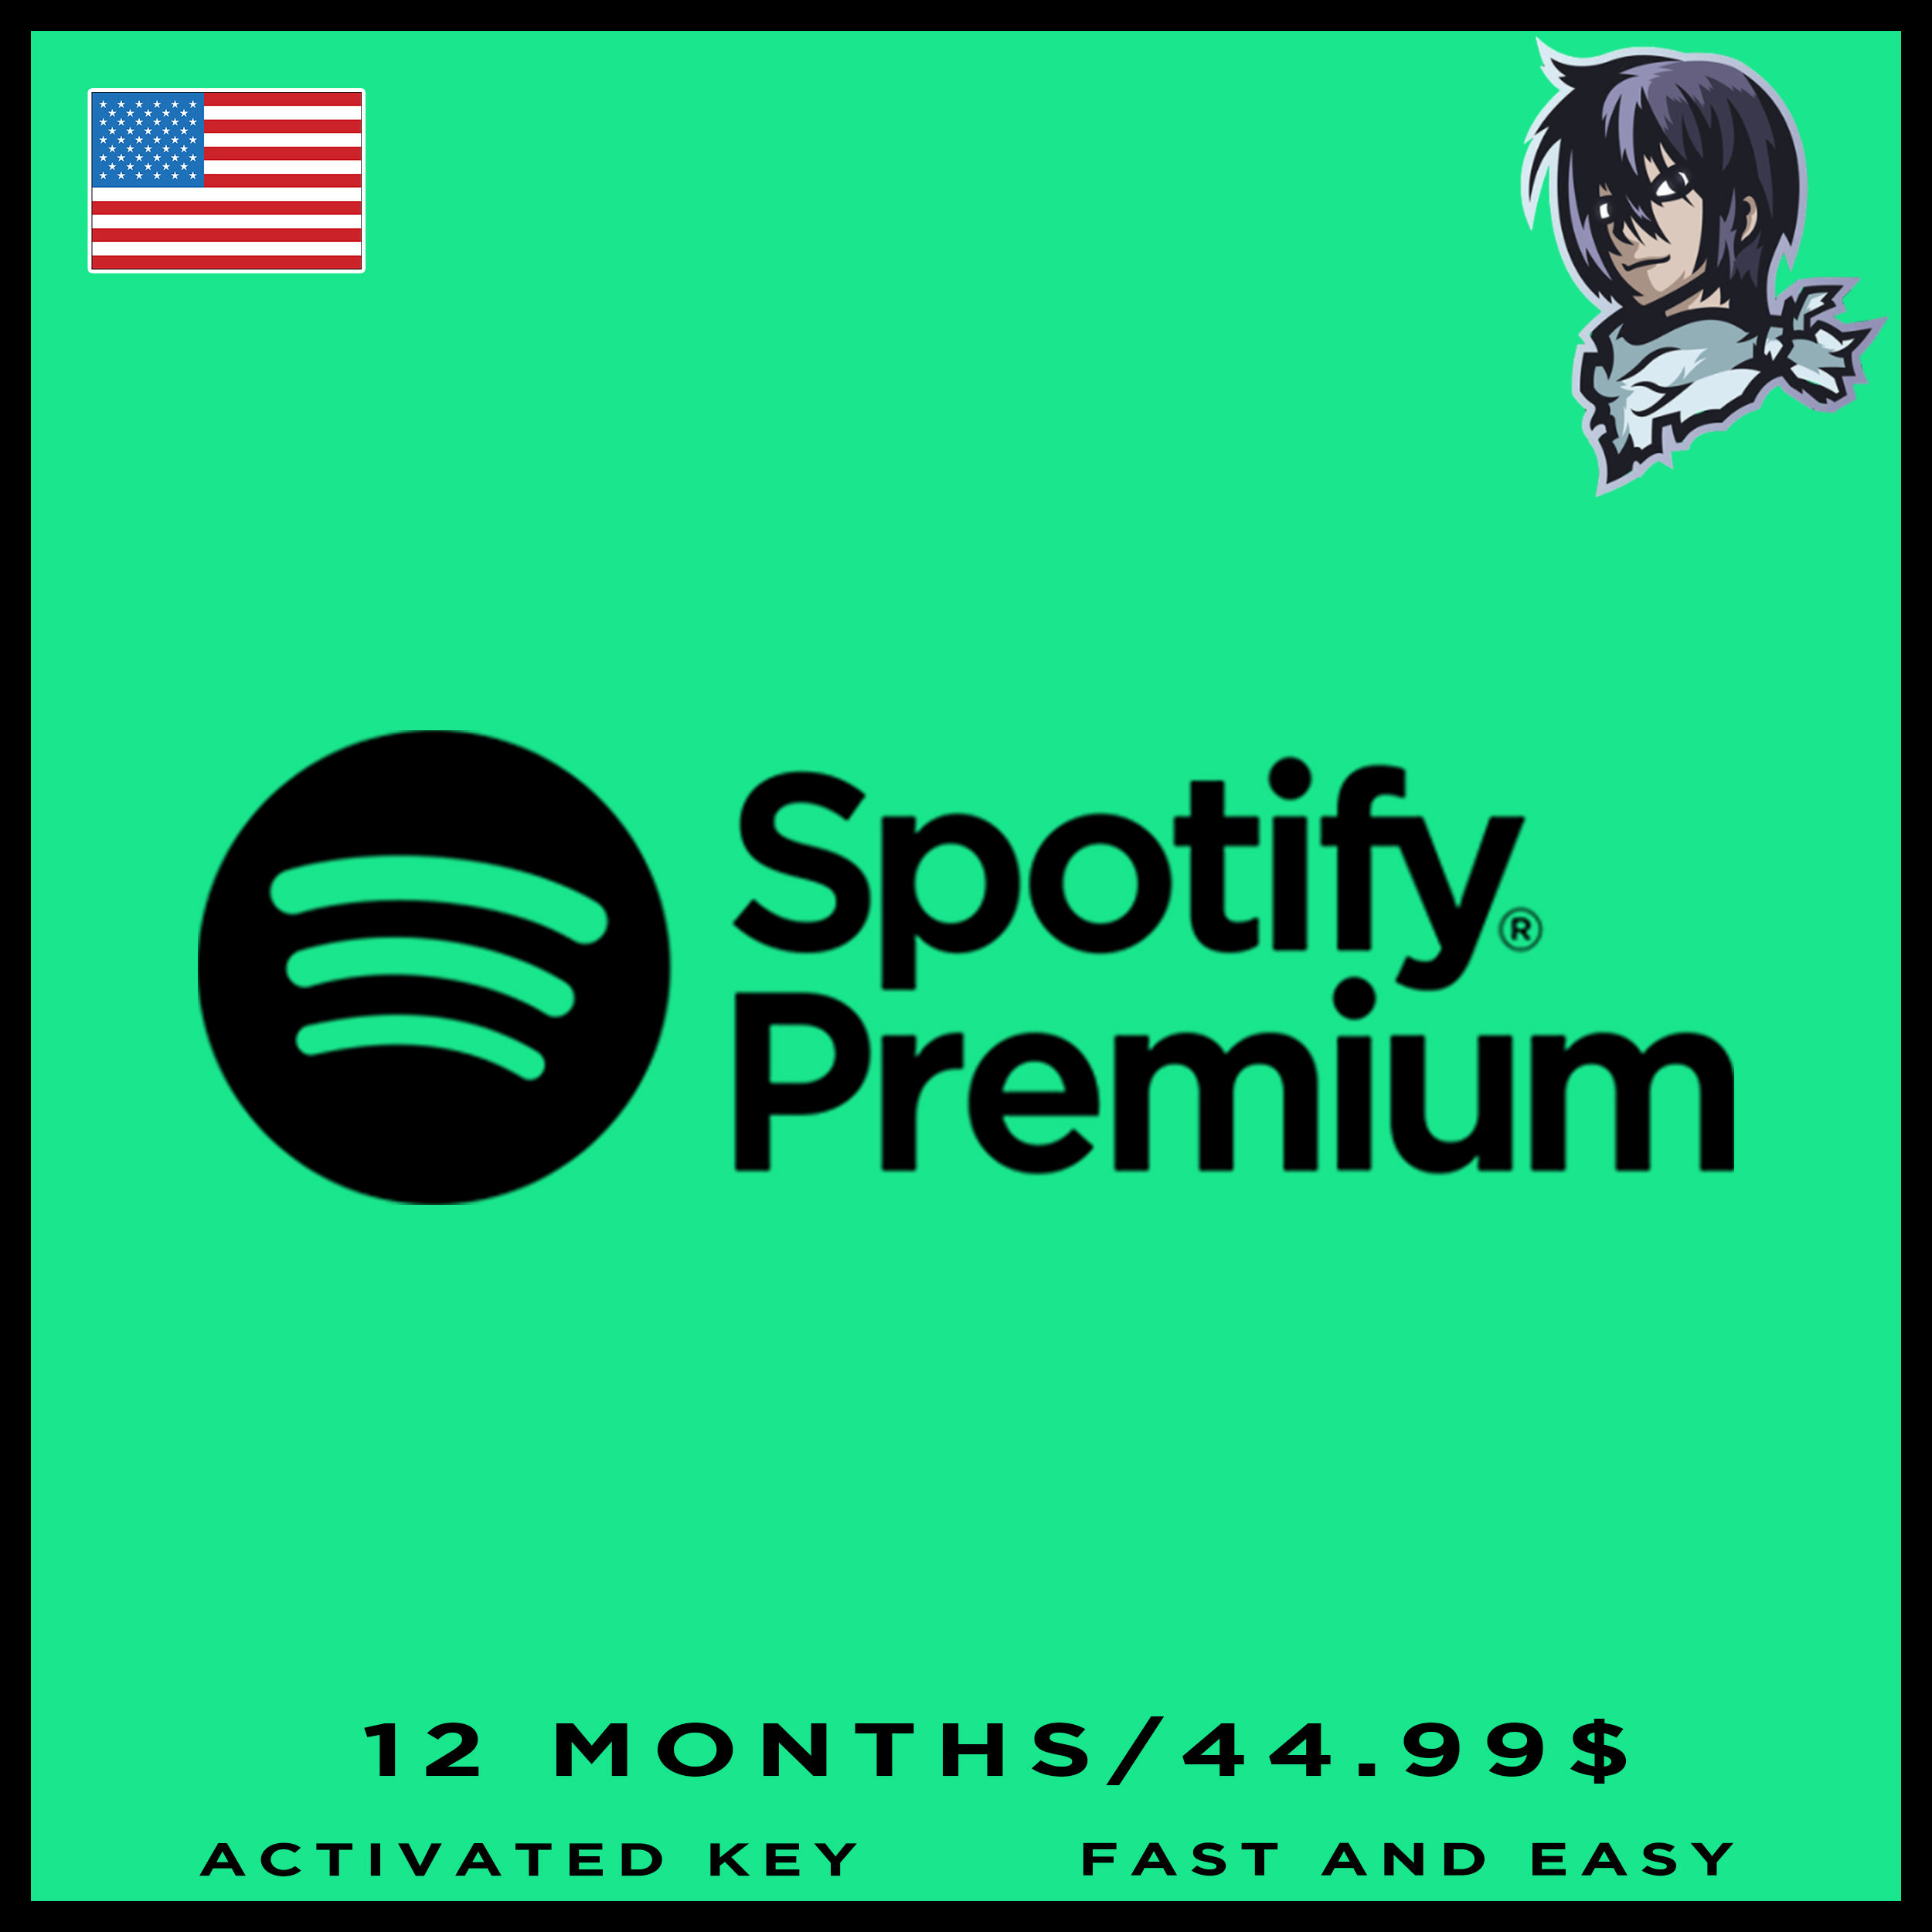 USA] SPOTIFY PREMIUM 12 MONTHS II ACTIVATION KEY II FAST AND EASY - iGV